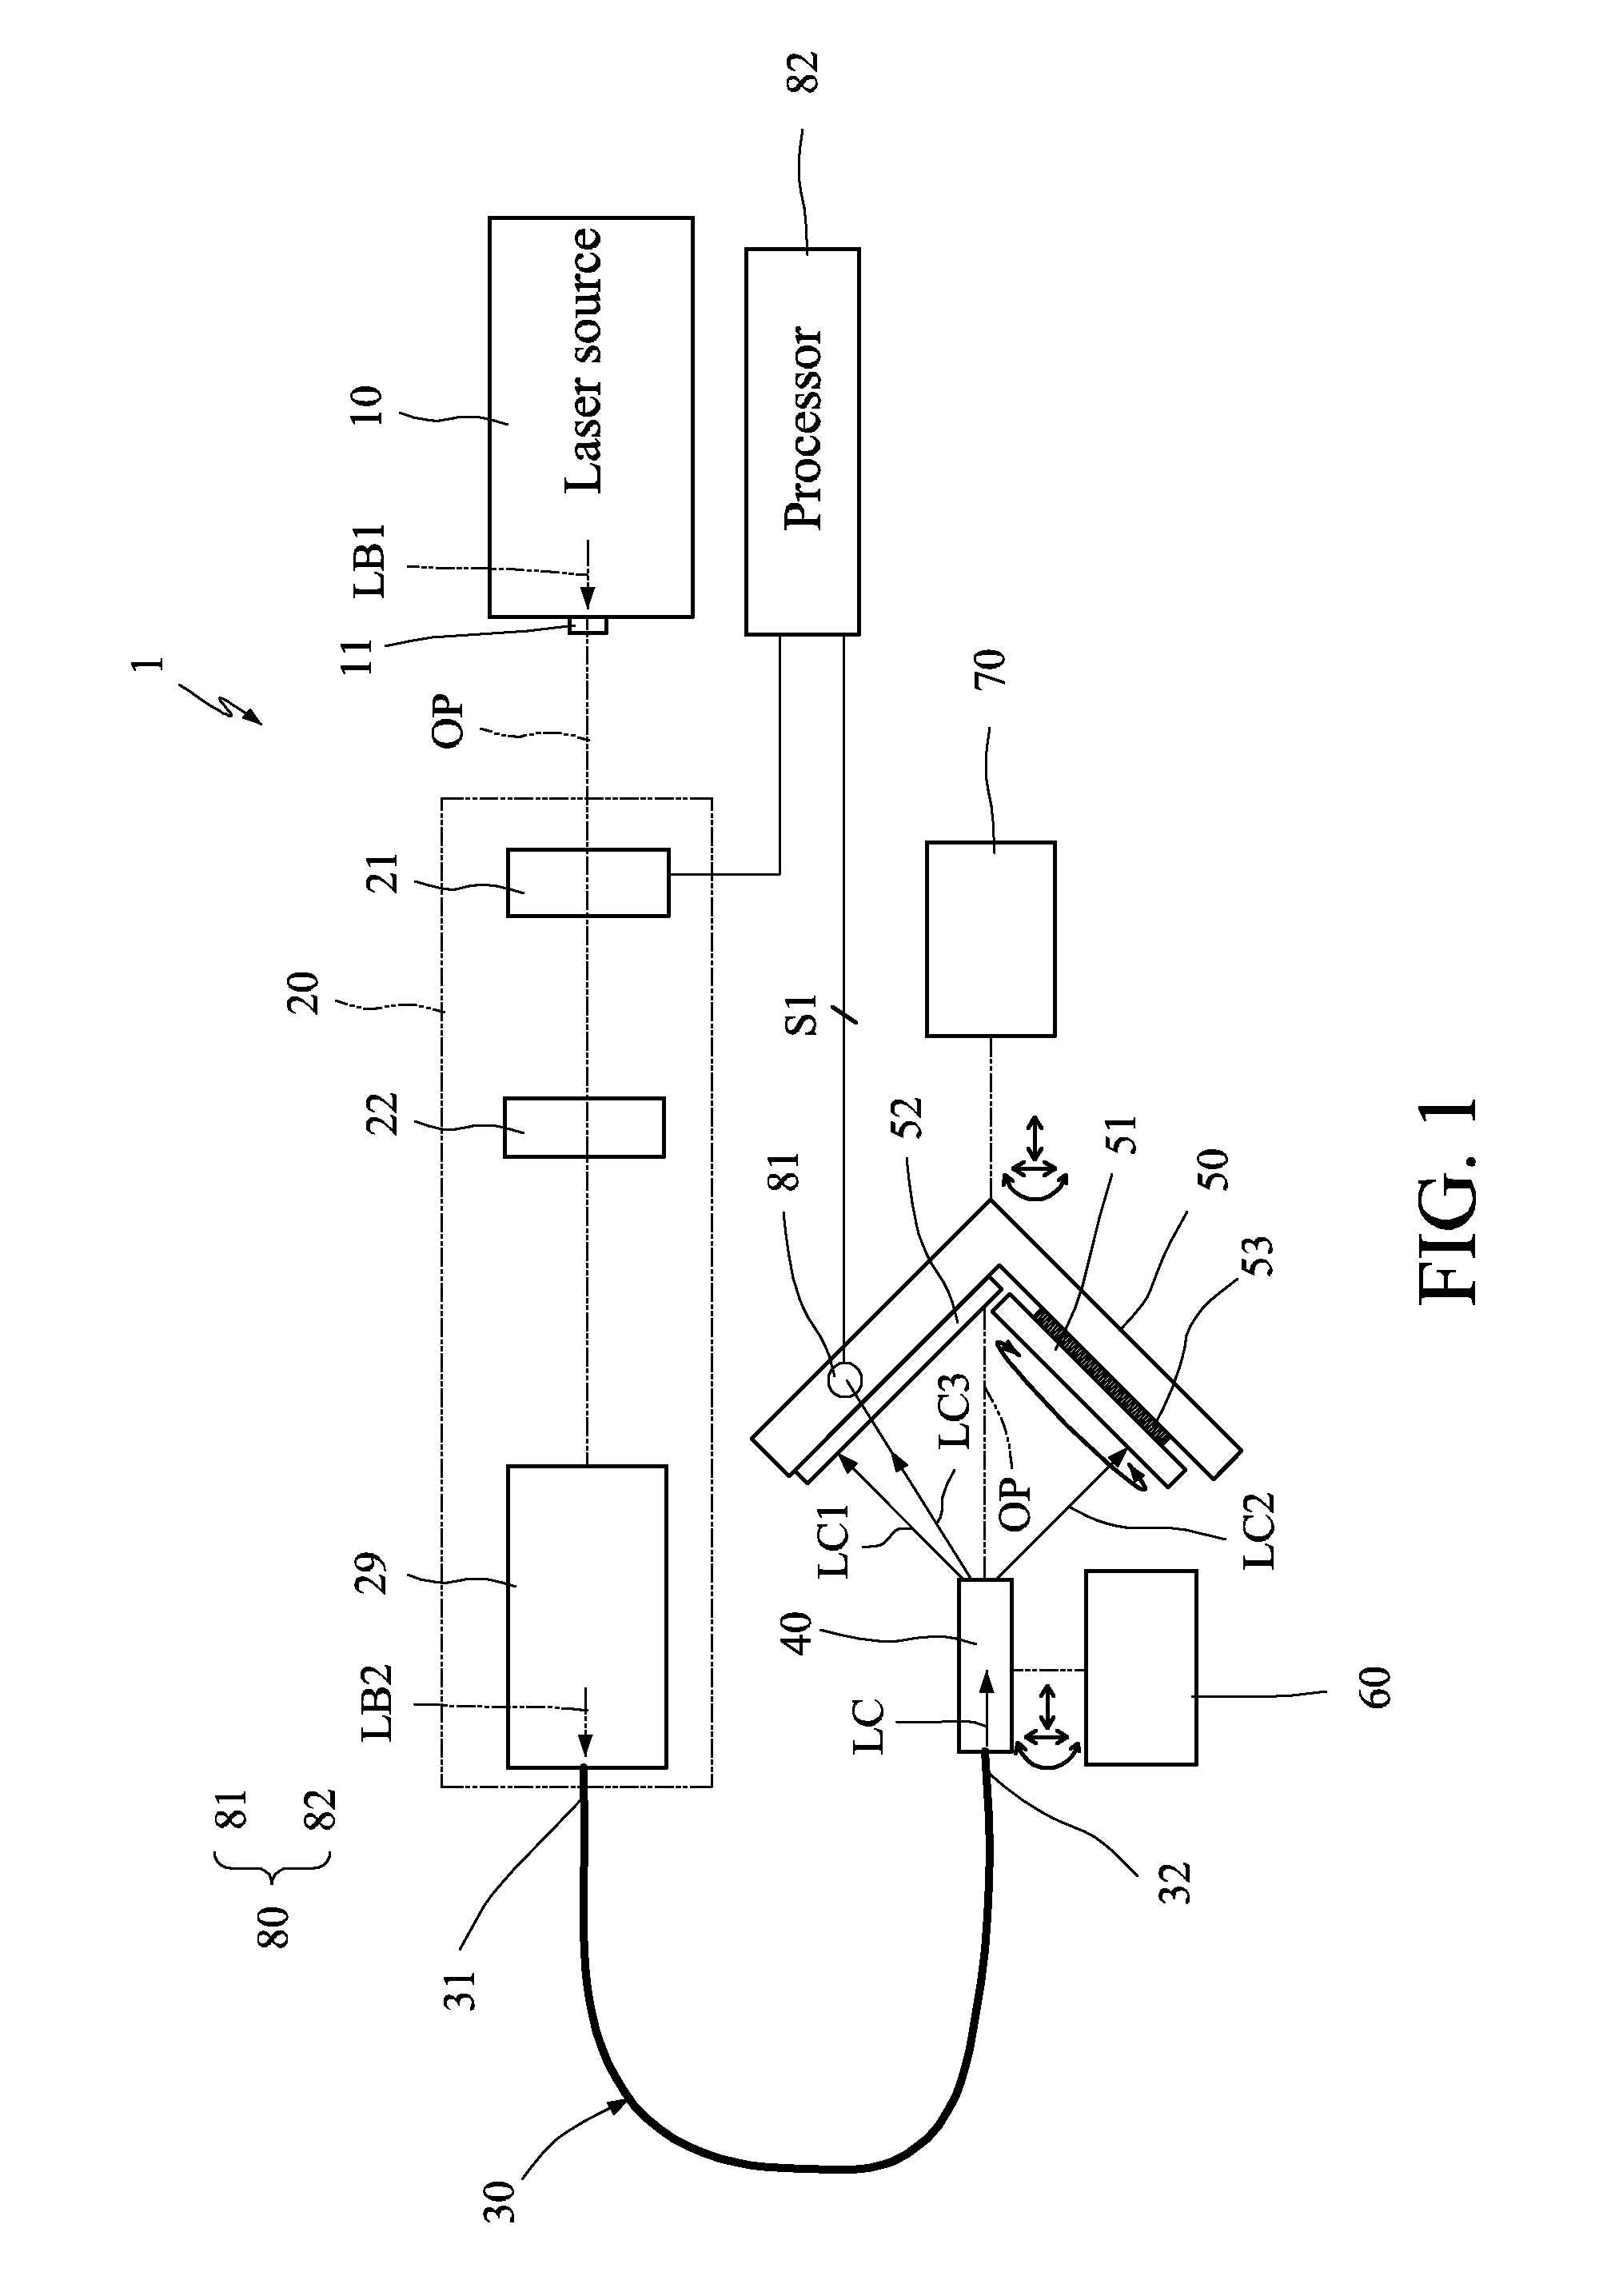 Laser Interference Lithography Apparatus Using Fiber as Spatial Filter and Beam Expander